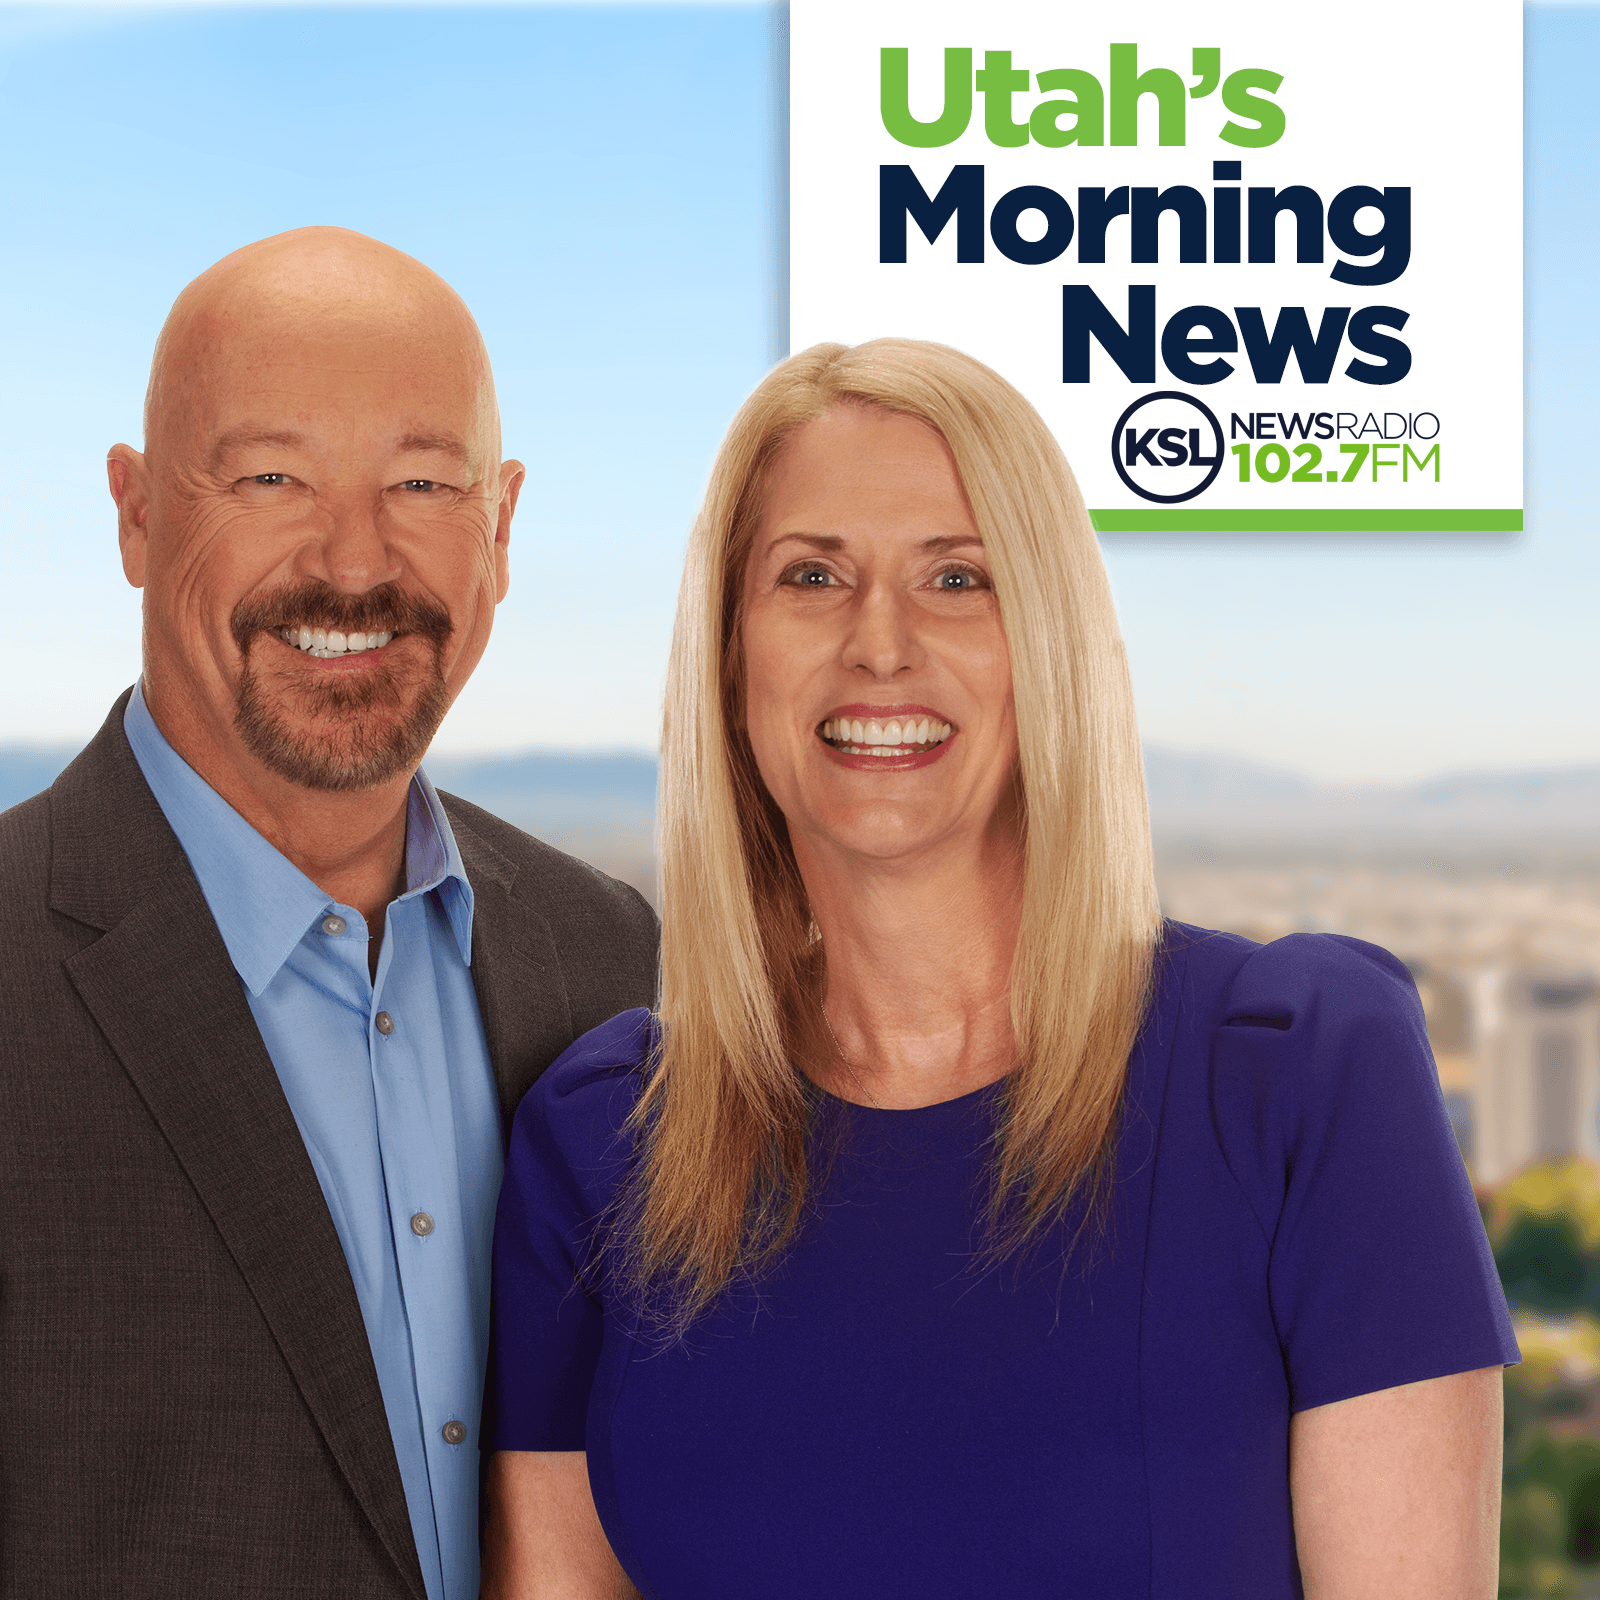 A new poll looks at when Utahns feel life can get back to normal - Feb. 24, 2021